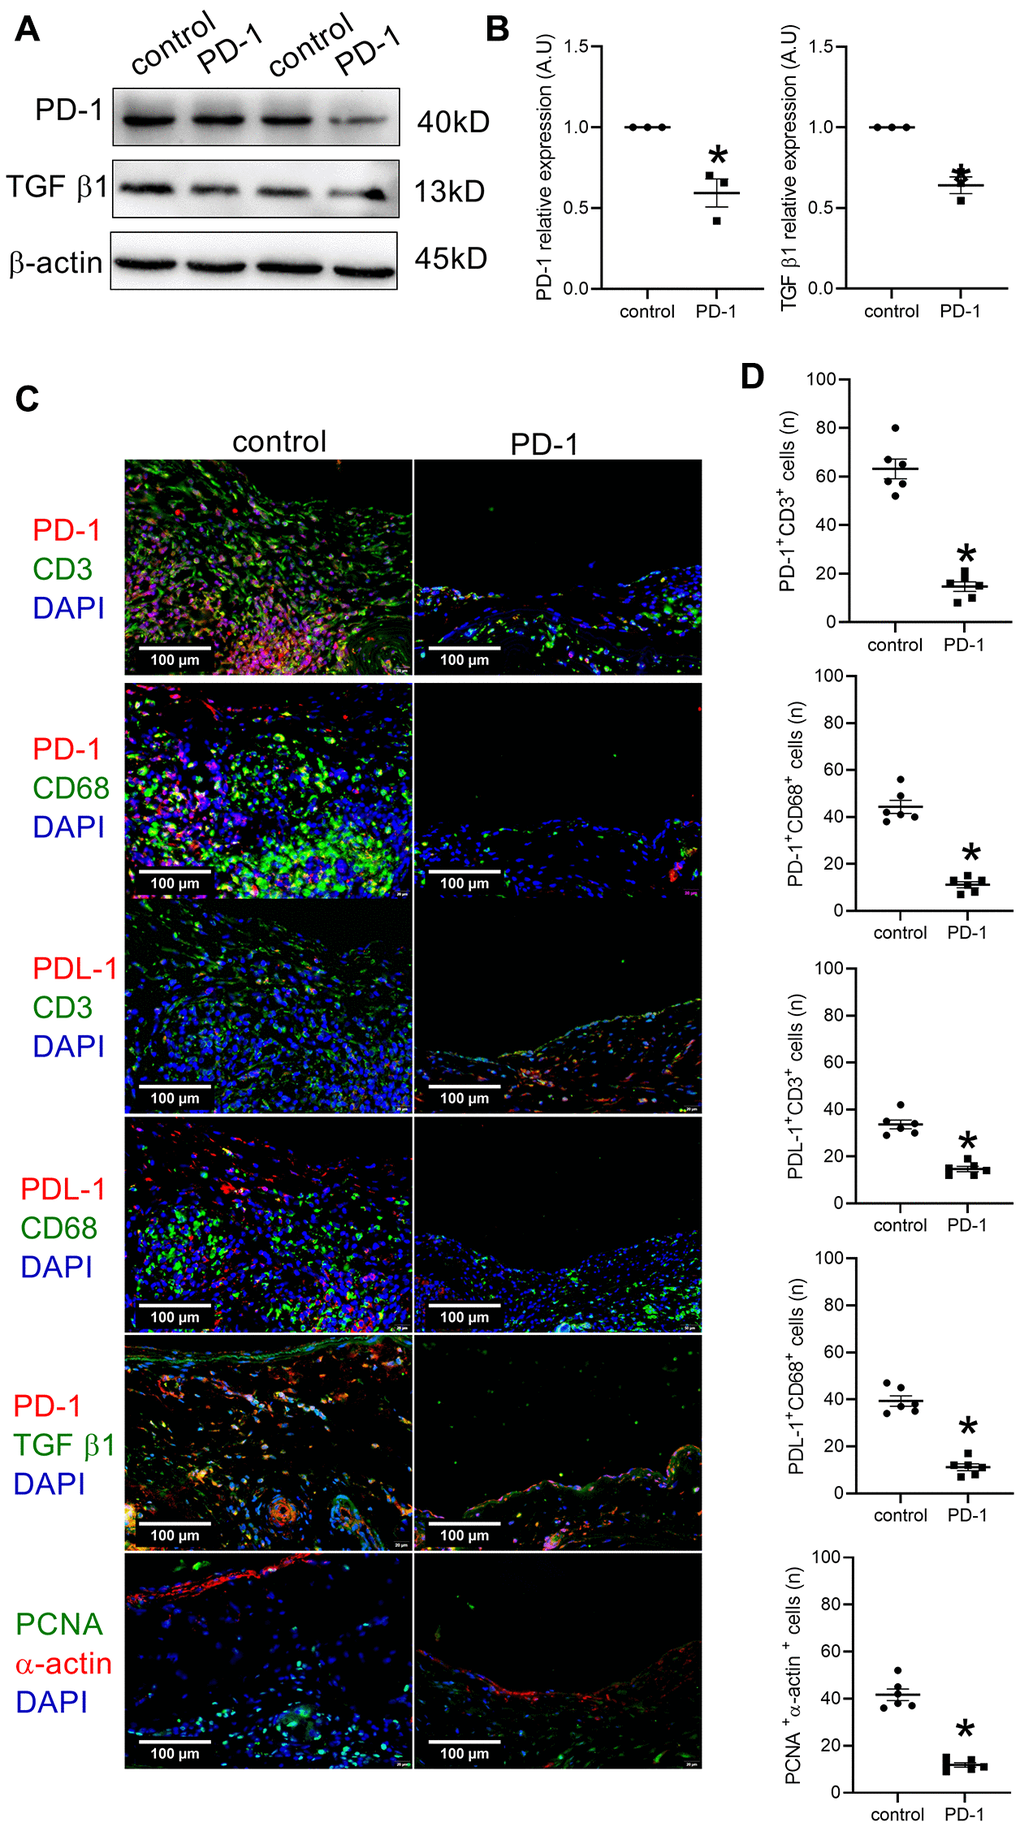 Intraperitoneal (IP) injection of PD-1 antibody decreases PD-1 expression after patch venoplasty in rats. (A) Western blot showing the expression of PD-1 and TGF β1 after the intraperitoneal injection of the PD-1 antibody in rat IVCs and neointimas at day 14; n = 3. (B) Bar graph showing PD-1 (*p = 0.0096, t-test) and TGF β1 (*p = 0.0023, t-test) density; n = 3. (C) Merged immunofluorescence images showing CD3 (green), PD-1 (red) and DAPI (blue); CD68 (green), PD-1 (red) and DAPI (blue); CD3 (green), PDL-1 (red) and DAPI (blue); CD68 (green), PDL-1 (red) and DAPI (blue); TGF β1 (green), PD-1 (red) and DAPI (blue); PCNA (green), α-actin (red) and DAPI (blue); scale bar, 100 μm; n = 6. (D) Bar graphs showing CD3 and PD-1 dual-positive cells (*p t-test); CD68 and PD-1 dual-positive cells (*p t-test), CD3 and PDL-1 dual-positive cells (*p t-test); CD68 and PDL-1 dual-positive cells (*p t-test), PCNA and α-actin dual-positive cells (*p t-test); n = 6.